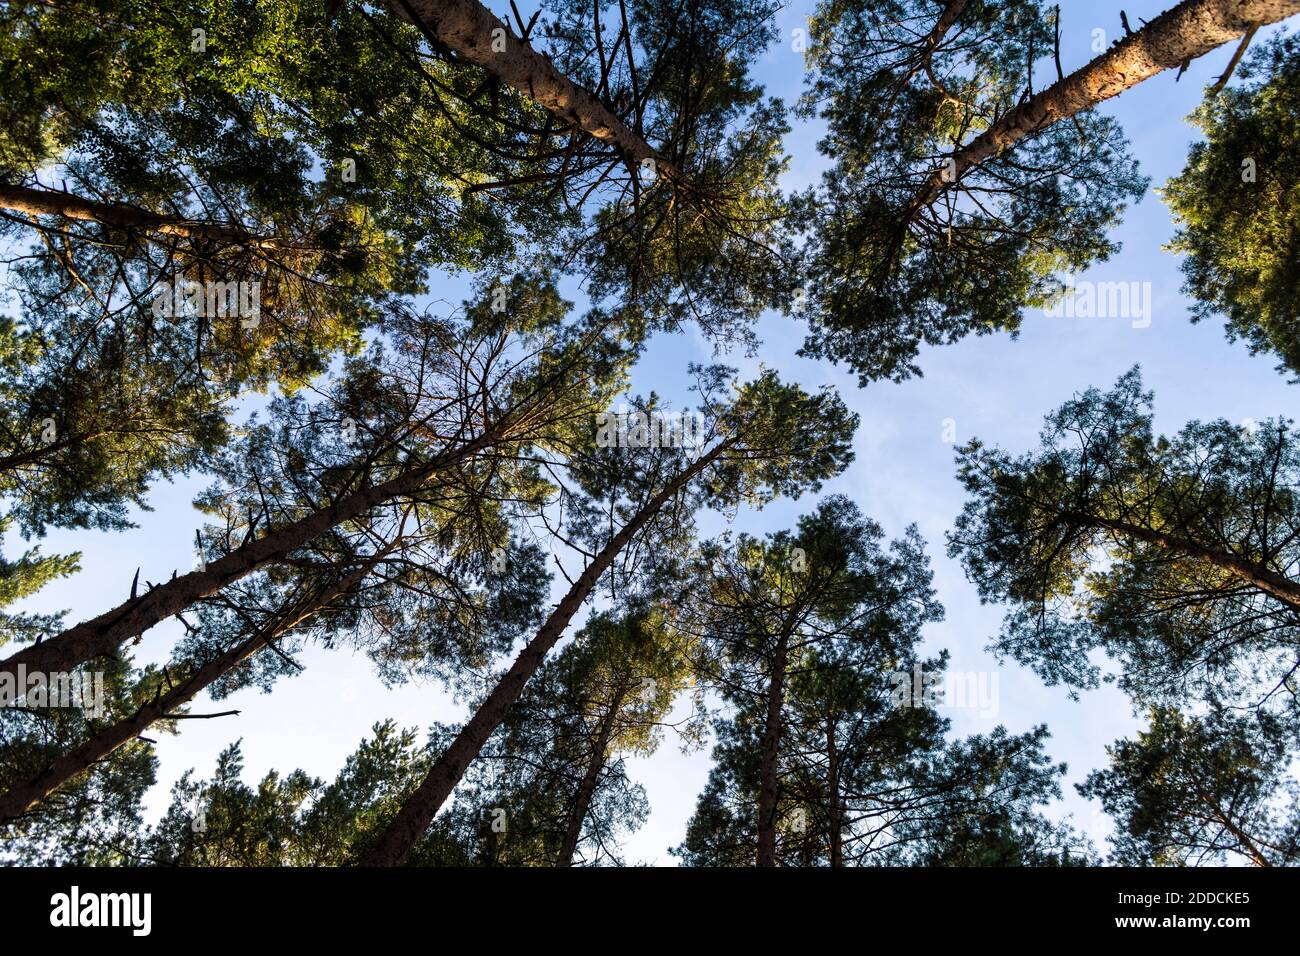 Forest trees canopies Stock Photo